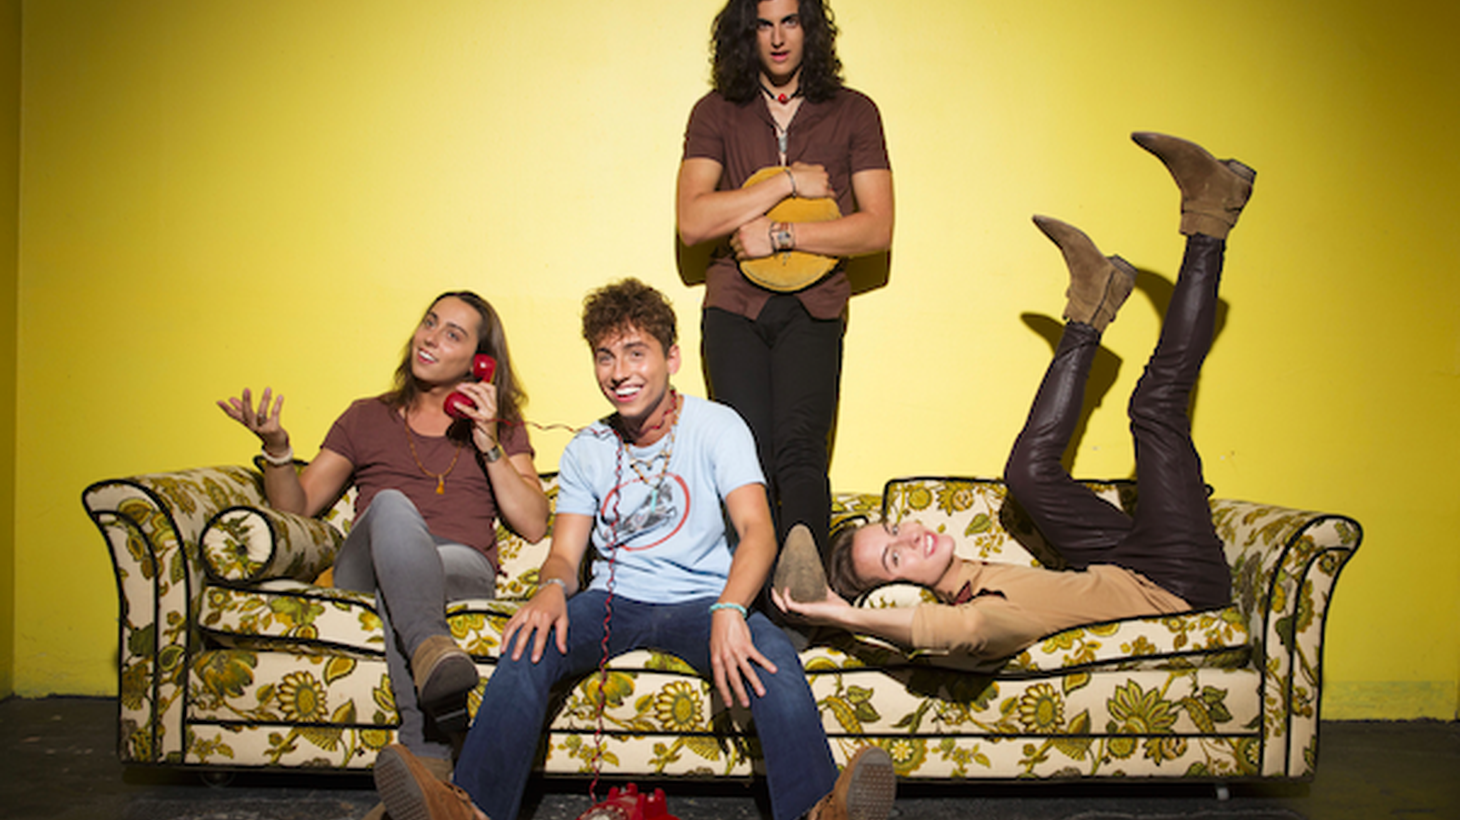 Michigan quartet Greta Van Fleet has seen a quick rise to fame for their classic rock sound. They were the talk of Coachella this year and will bring a blistering live set to our basement studio.